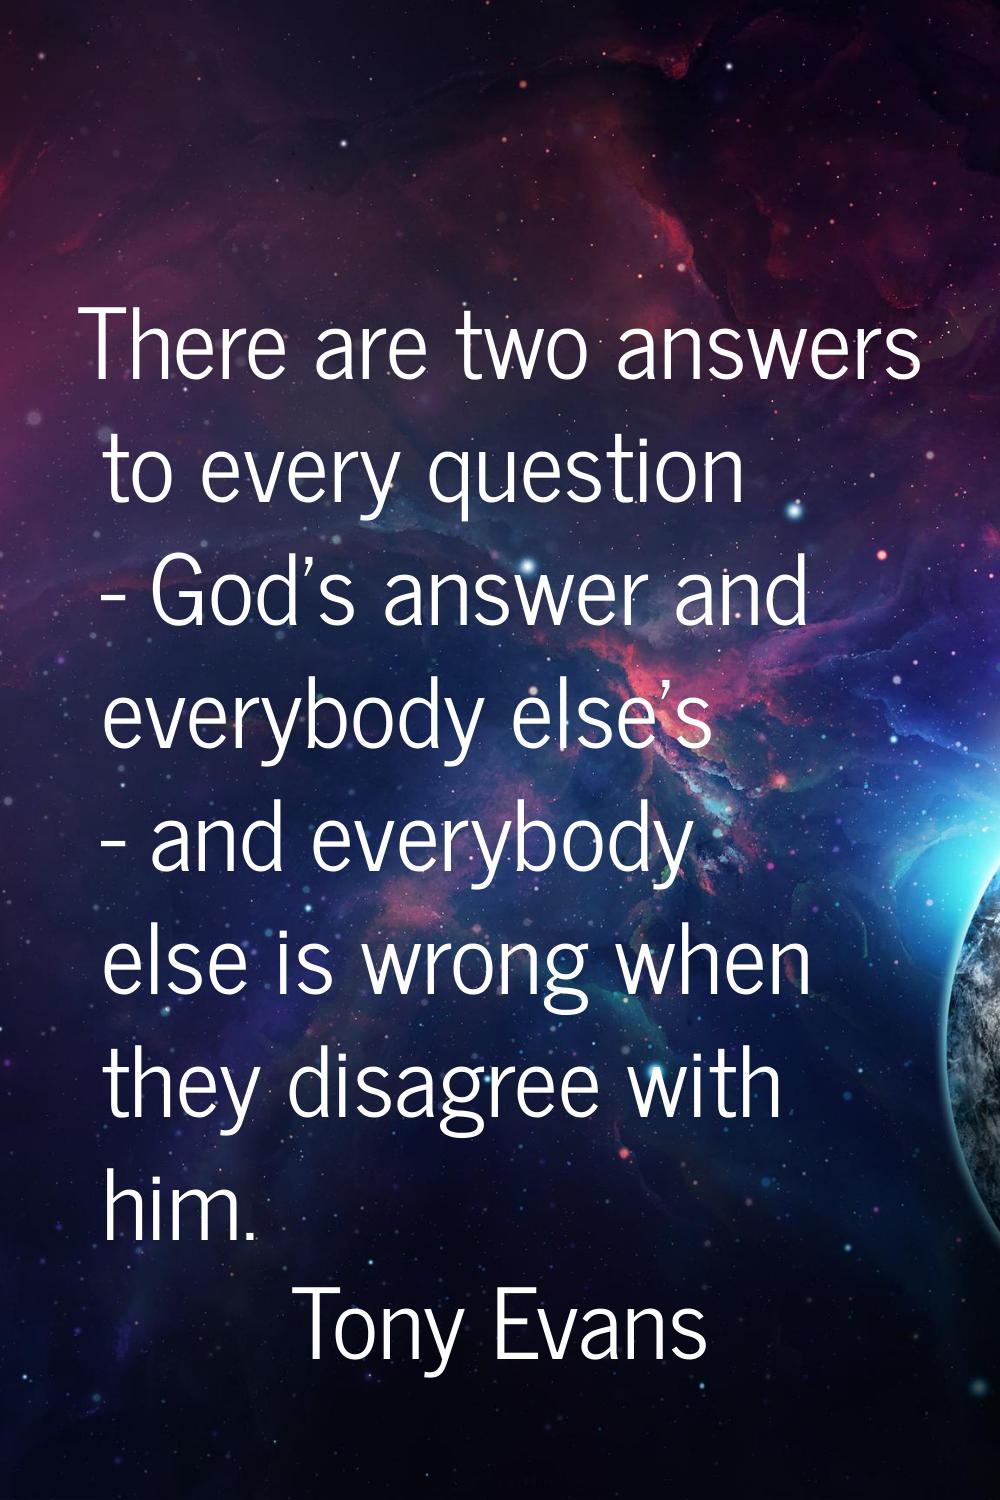 There are two answers to every question - God's answer and everybody else's - and everybody else is